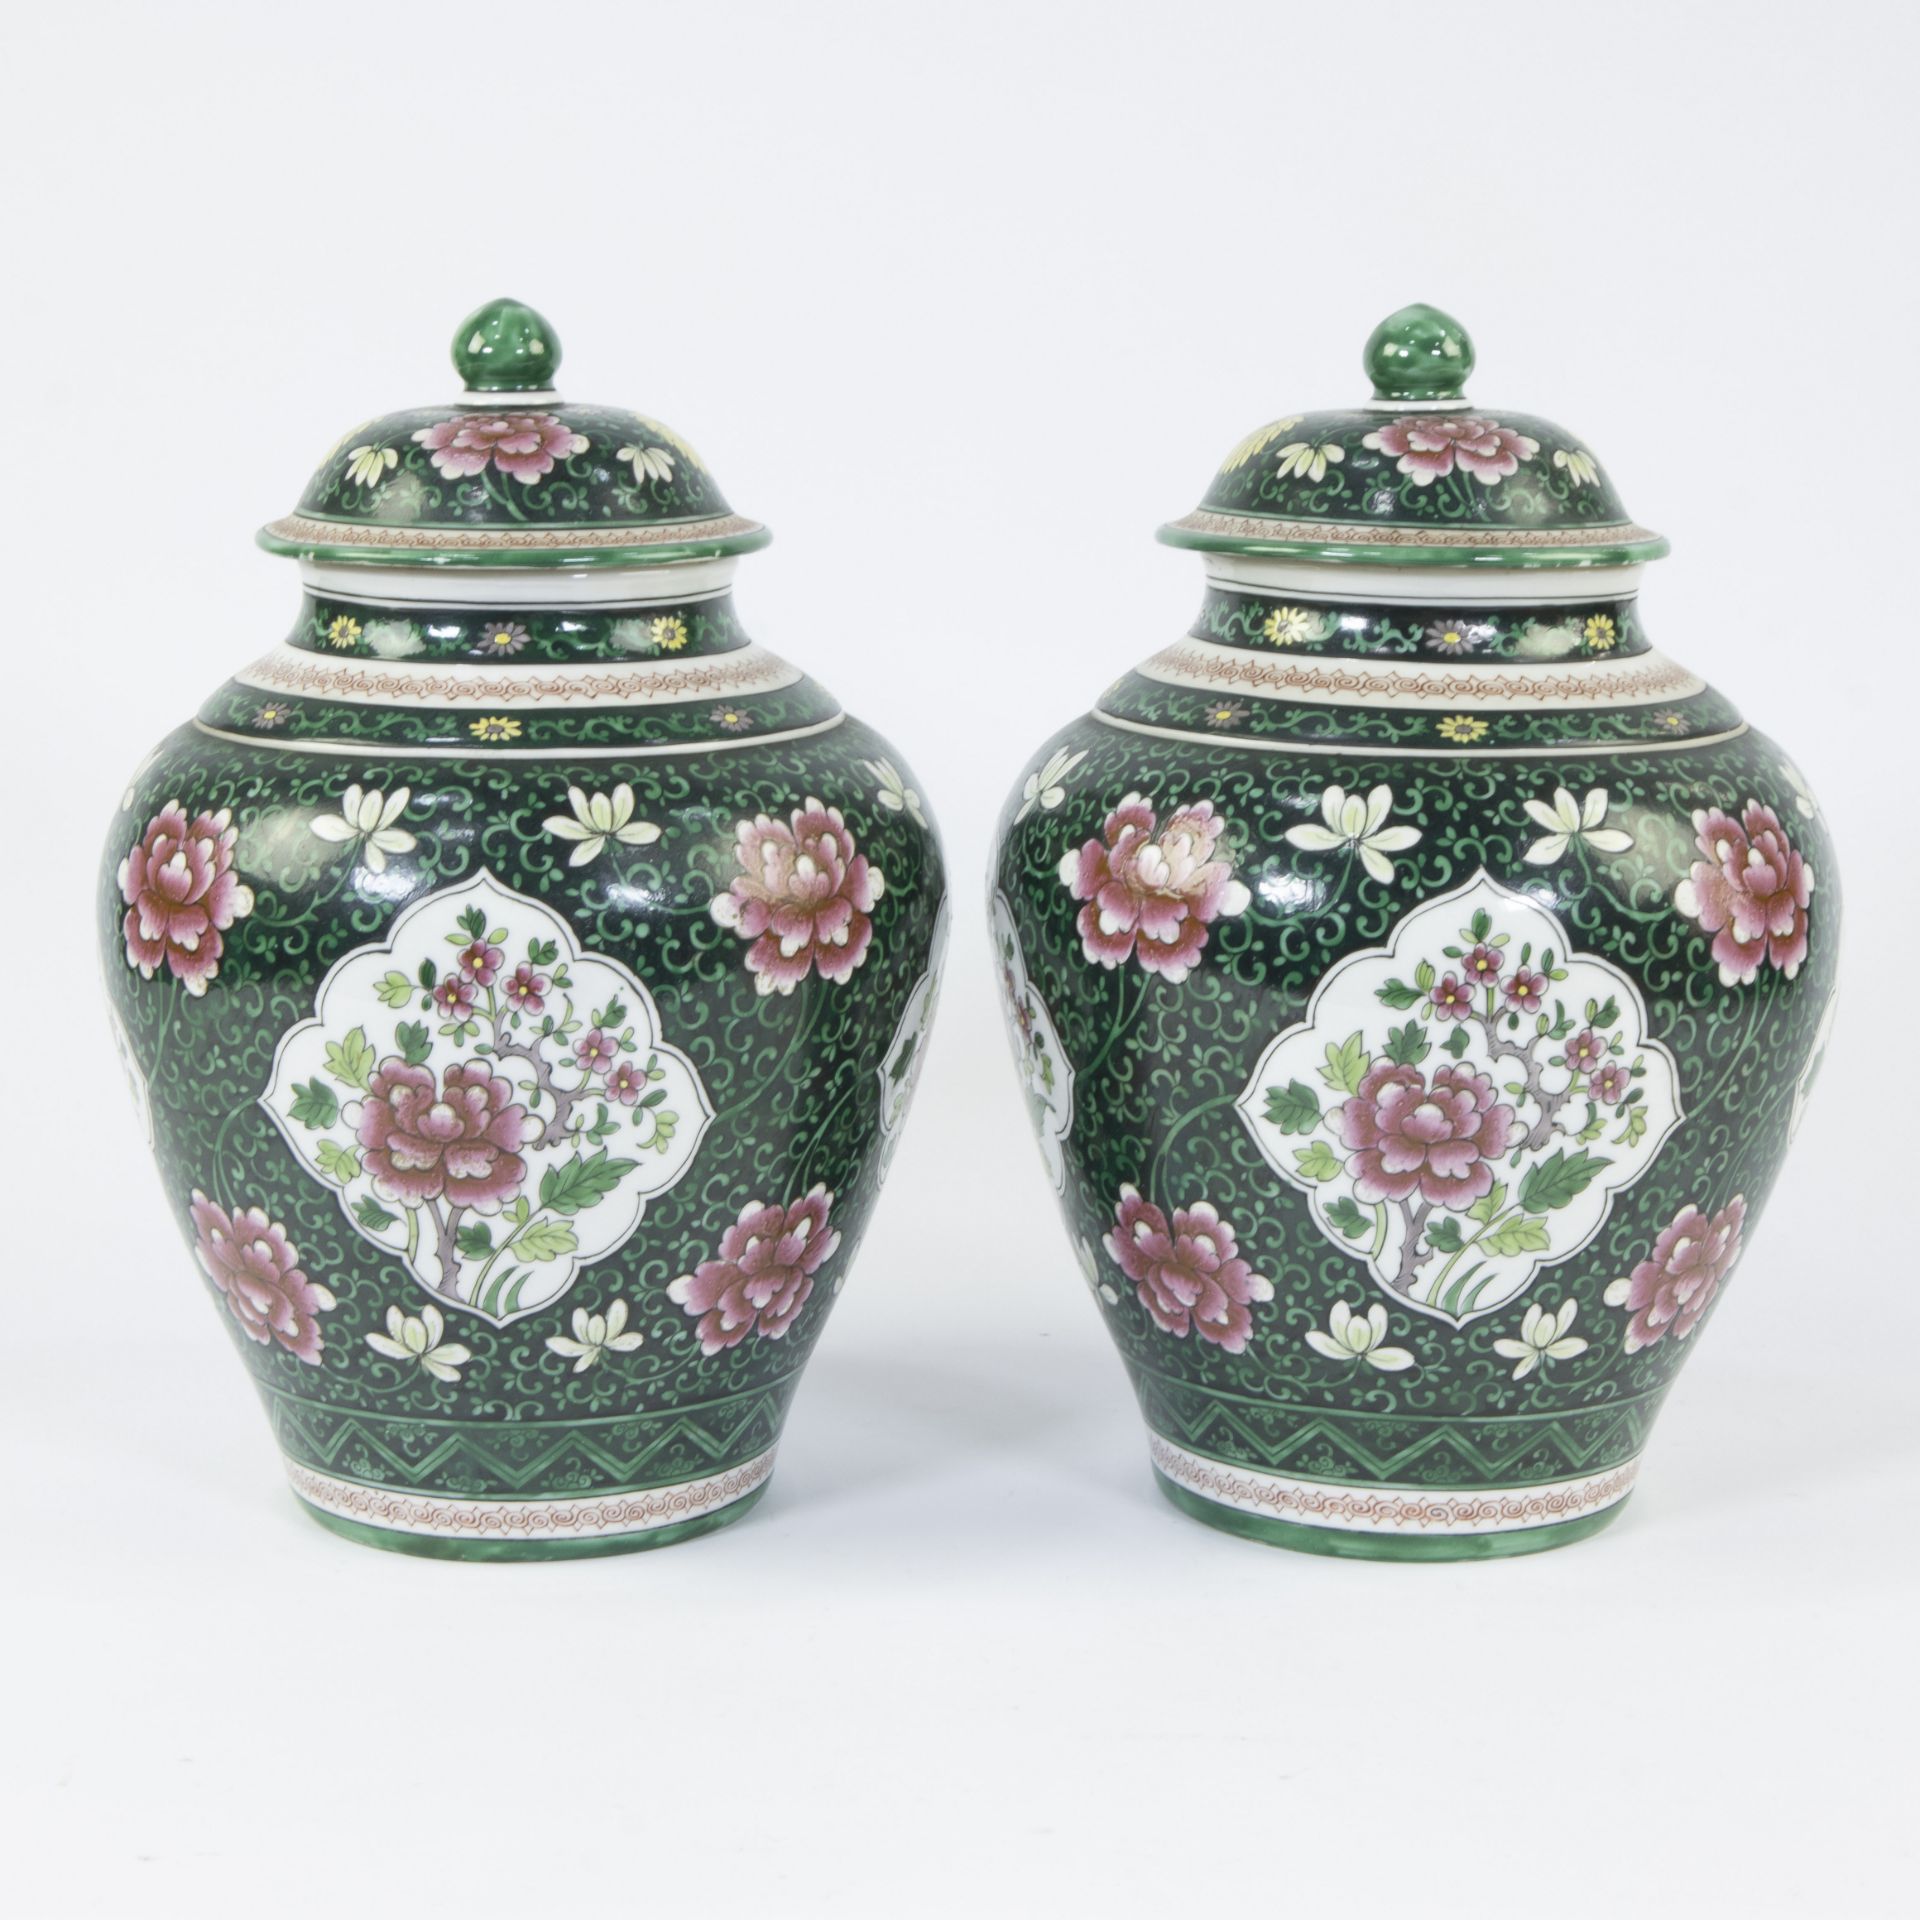 Pair of lidded vases in Samson porcelain with floral decoration in famille rose style - Image 3 of 7